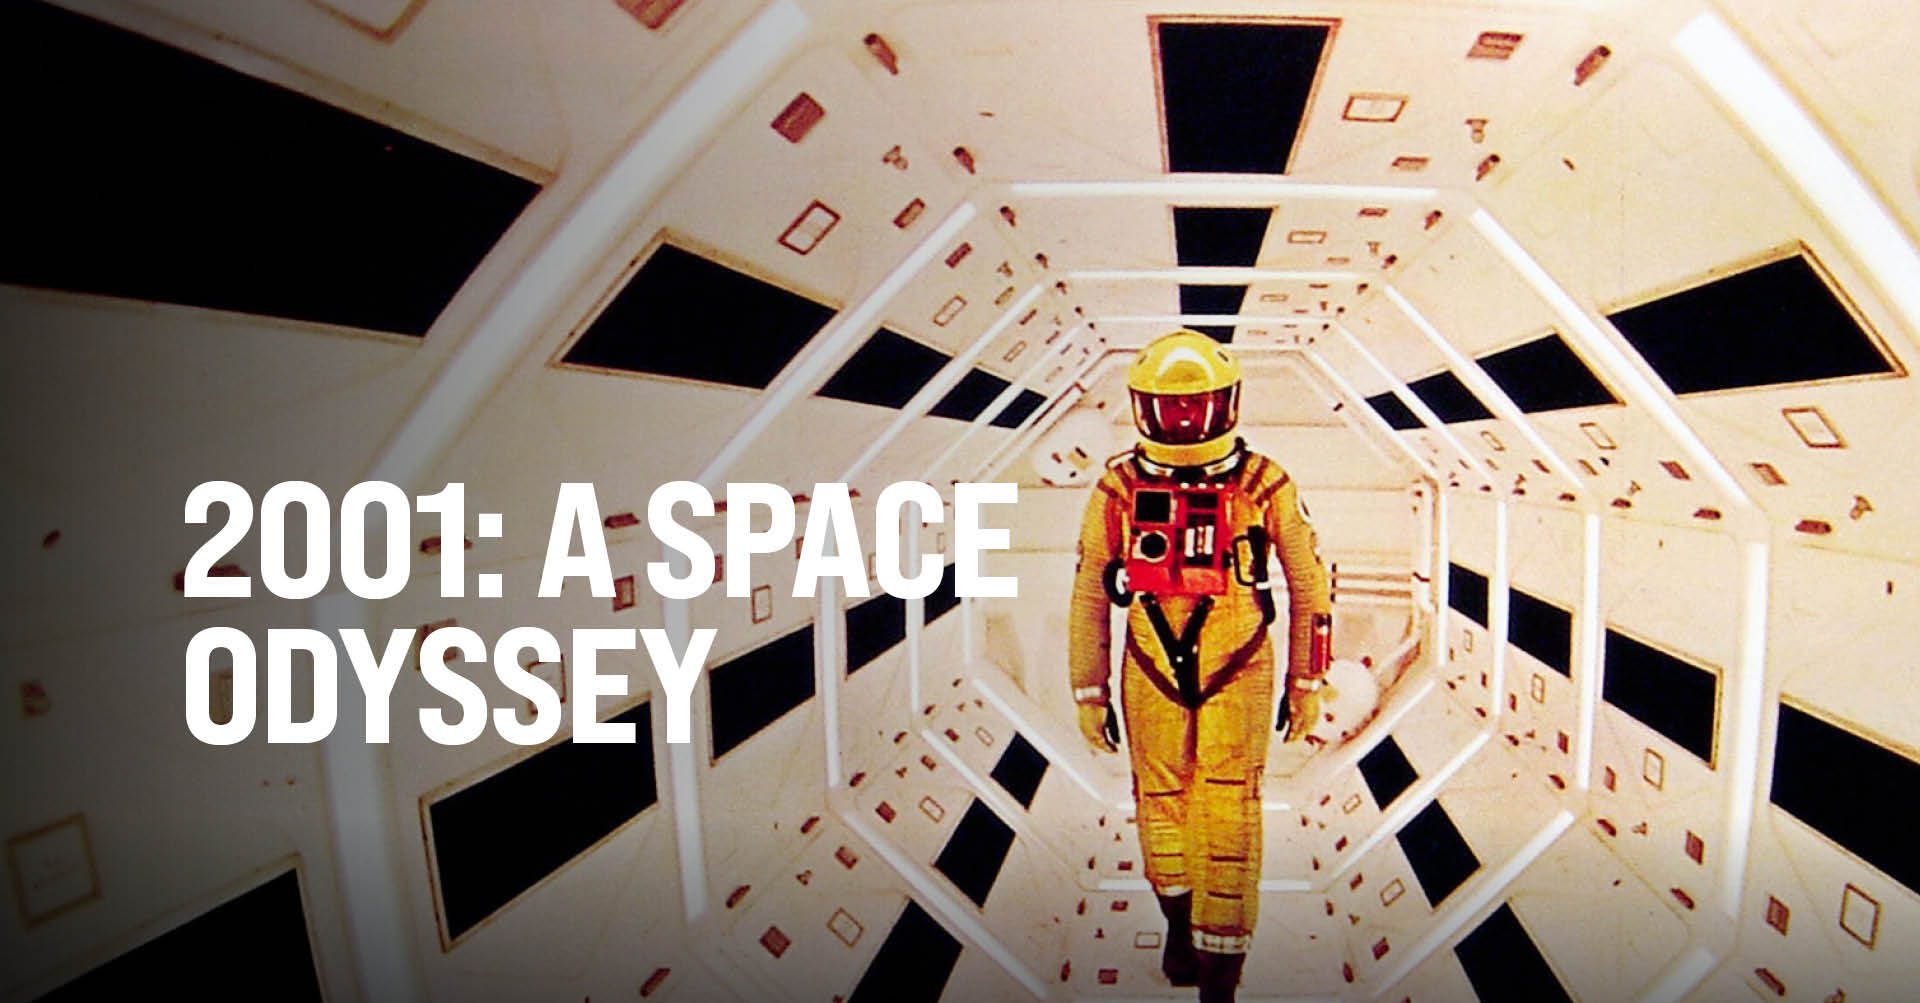 48 Facts about the movie 2001 A Space Odyssey